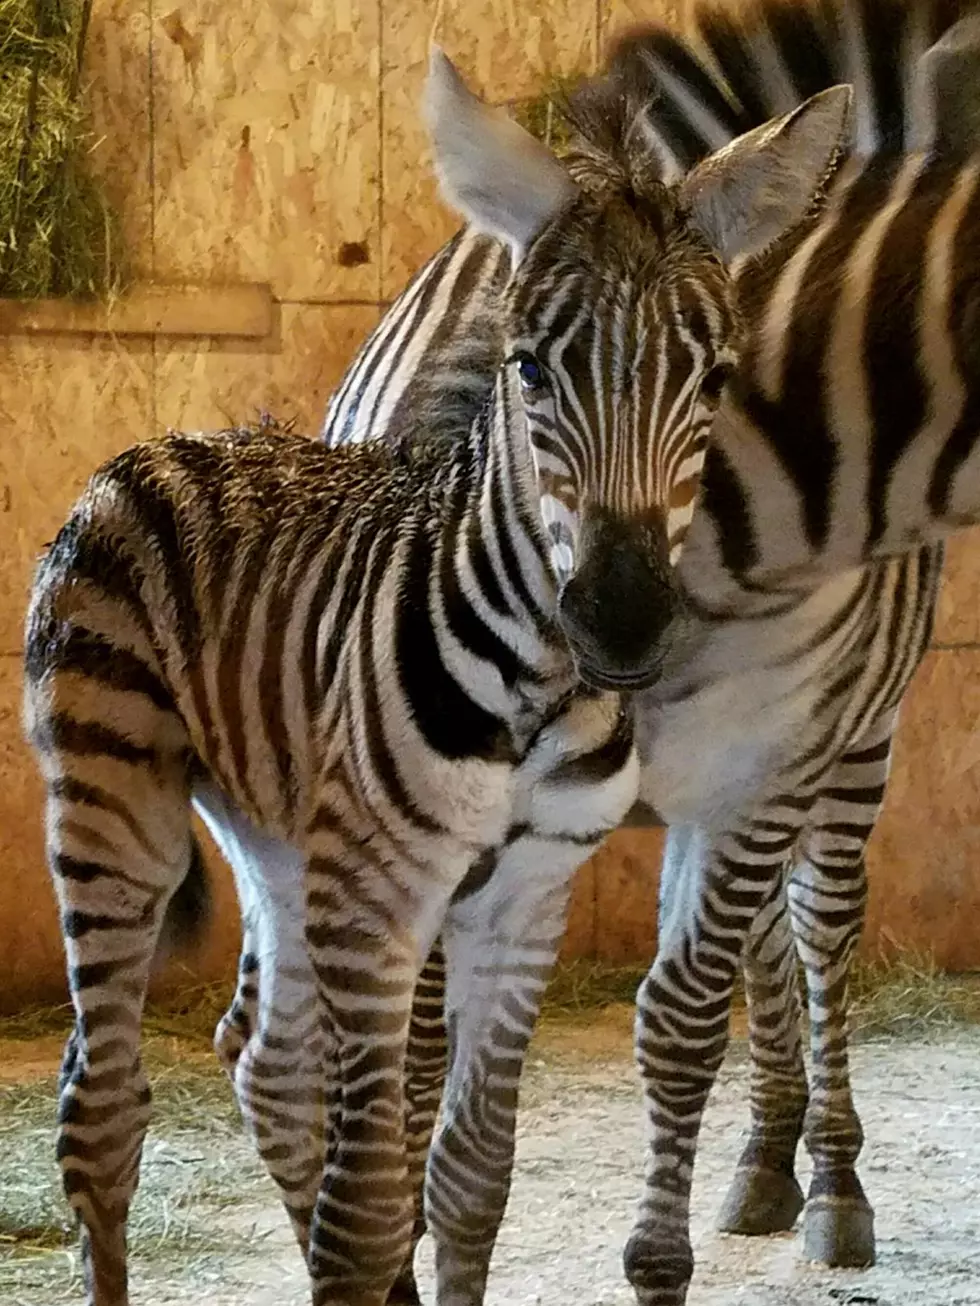 Zebra Born at Upstate NY Wild Animal Park During Snowstorm Gets Fitting Name